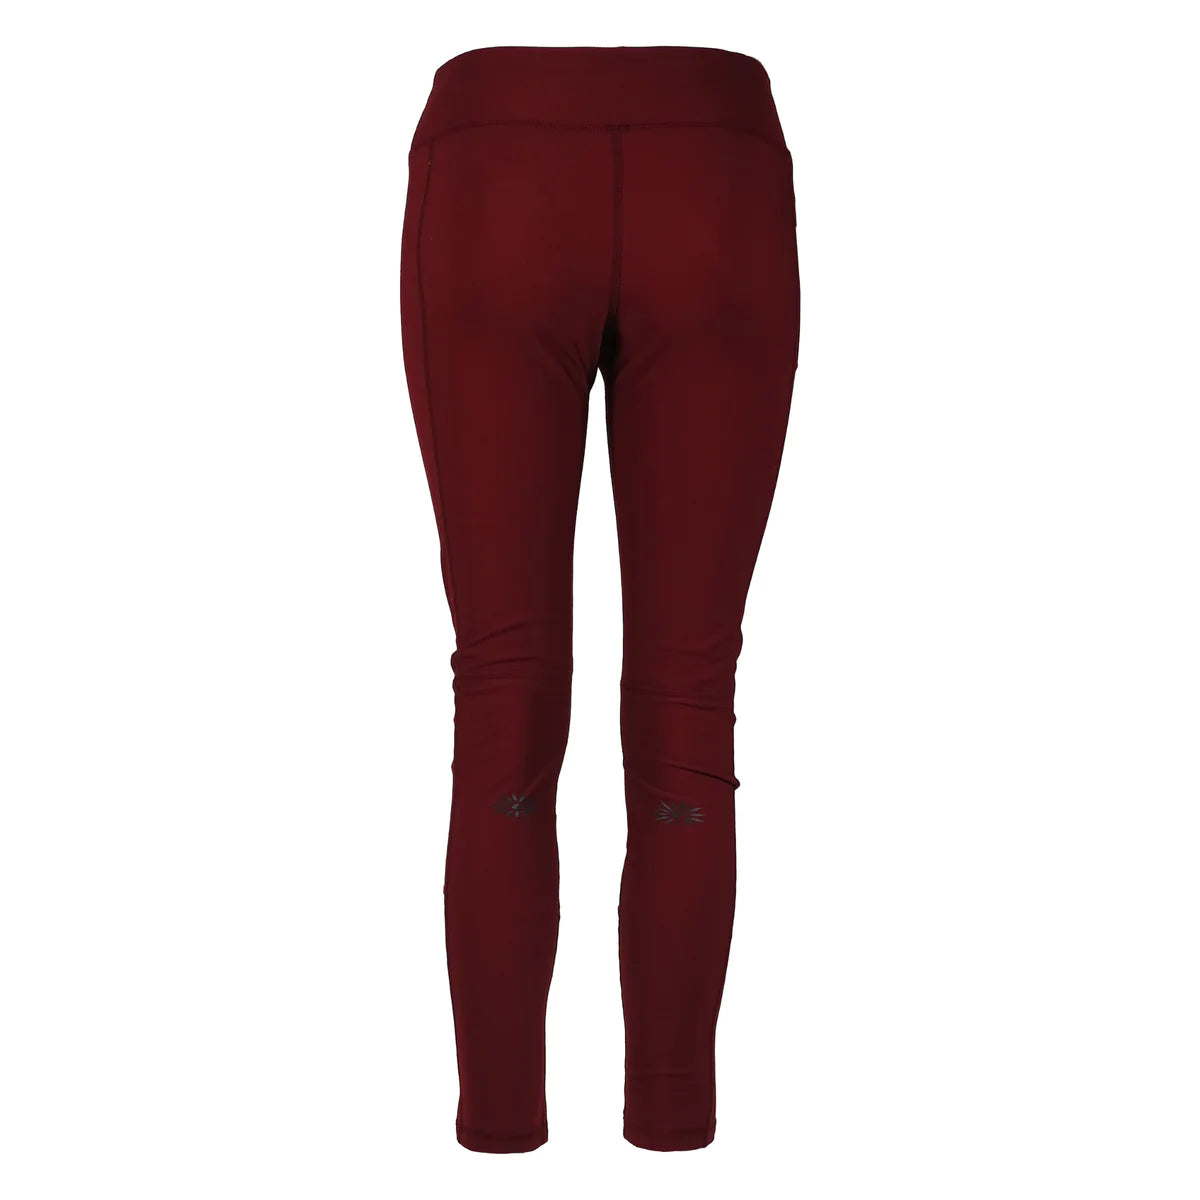 Women's Bottoms - Forests, Tides, and Treasures